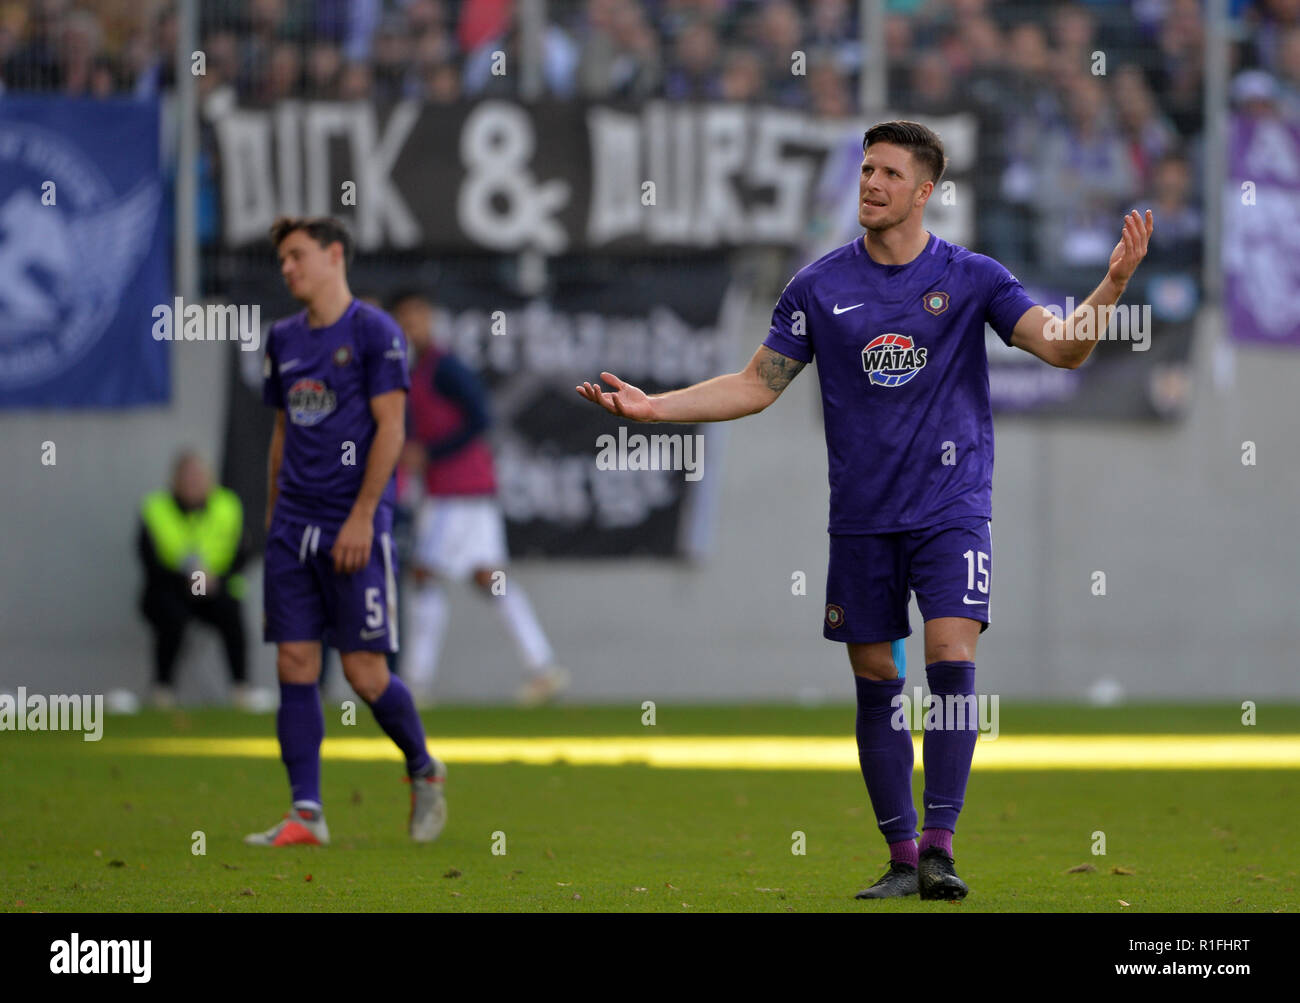 left to right: Clemens FANDRICH (Aue), Dennis KEMPE (Aue), frustrated,  frustrated, disappointment, disappointed, dejected, defeat, football 2nd  Bundesliga, 13th matchday, Erzgebirge Aue (AUE) - HSV Hamburg Hamburg  Hamburg (HH) 1: 3, on